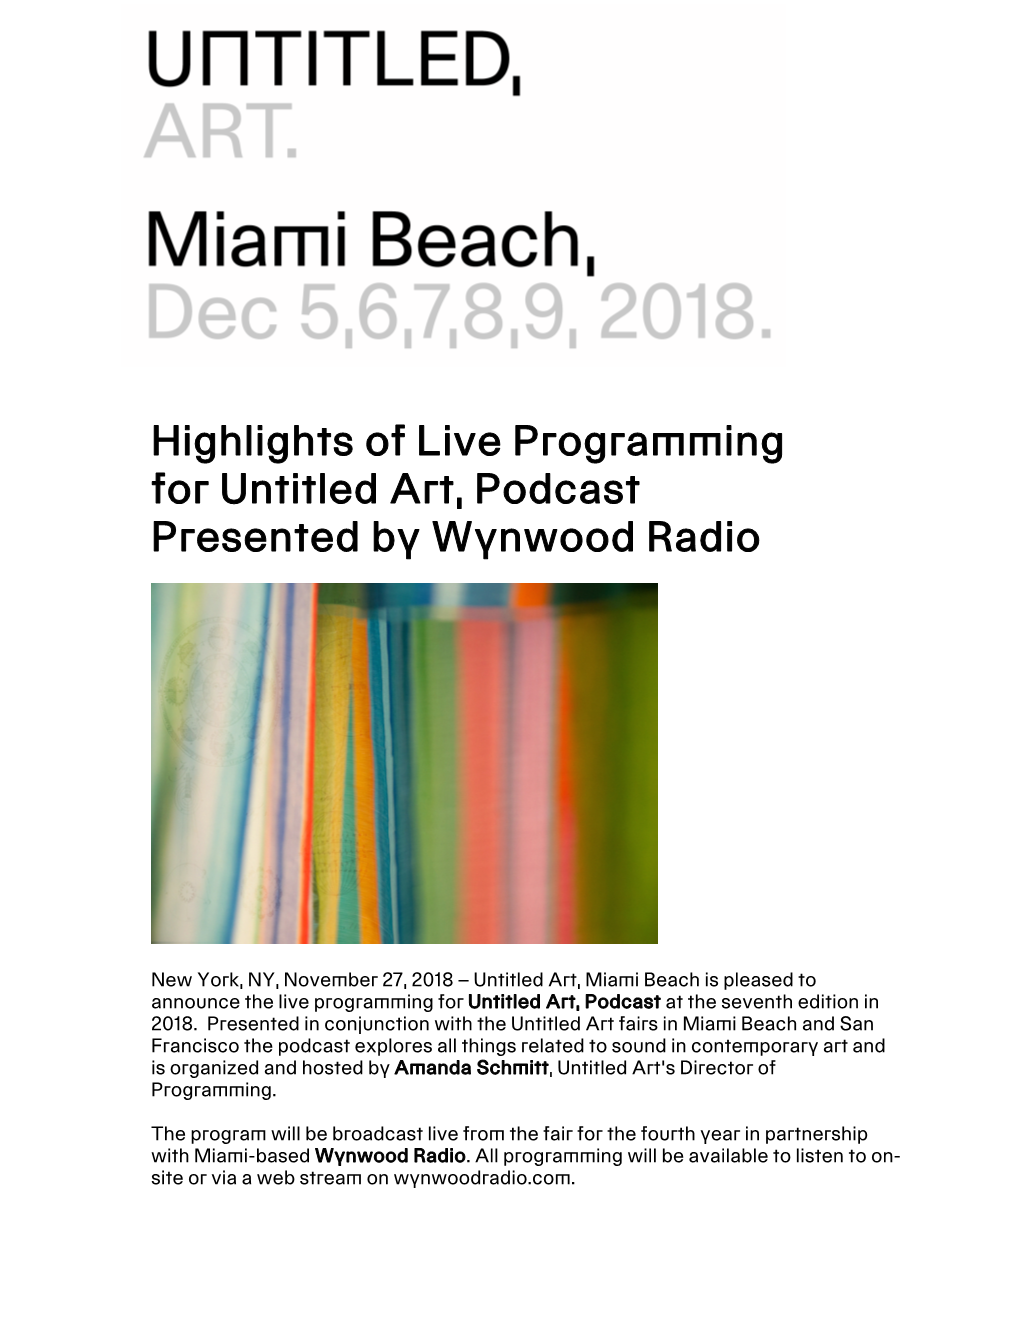 Highlights of Live Programming for Untitled Art, Podcast Presented by Wynwood Radio